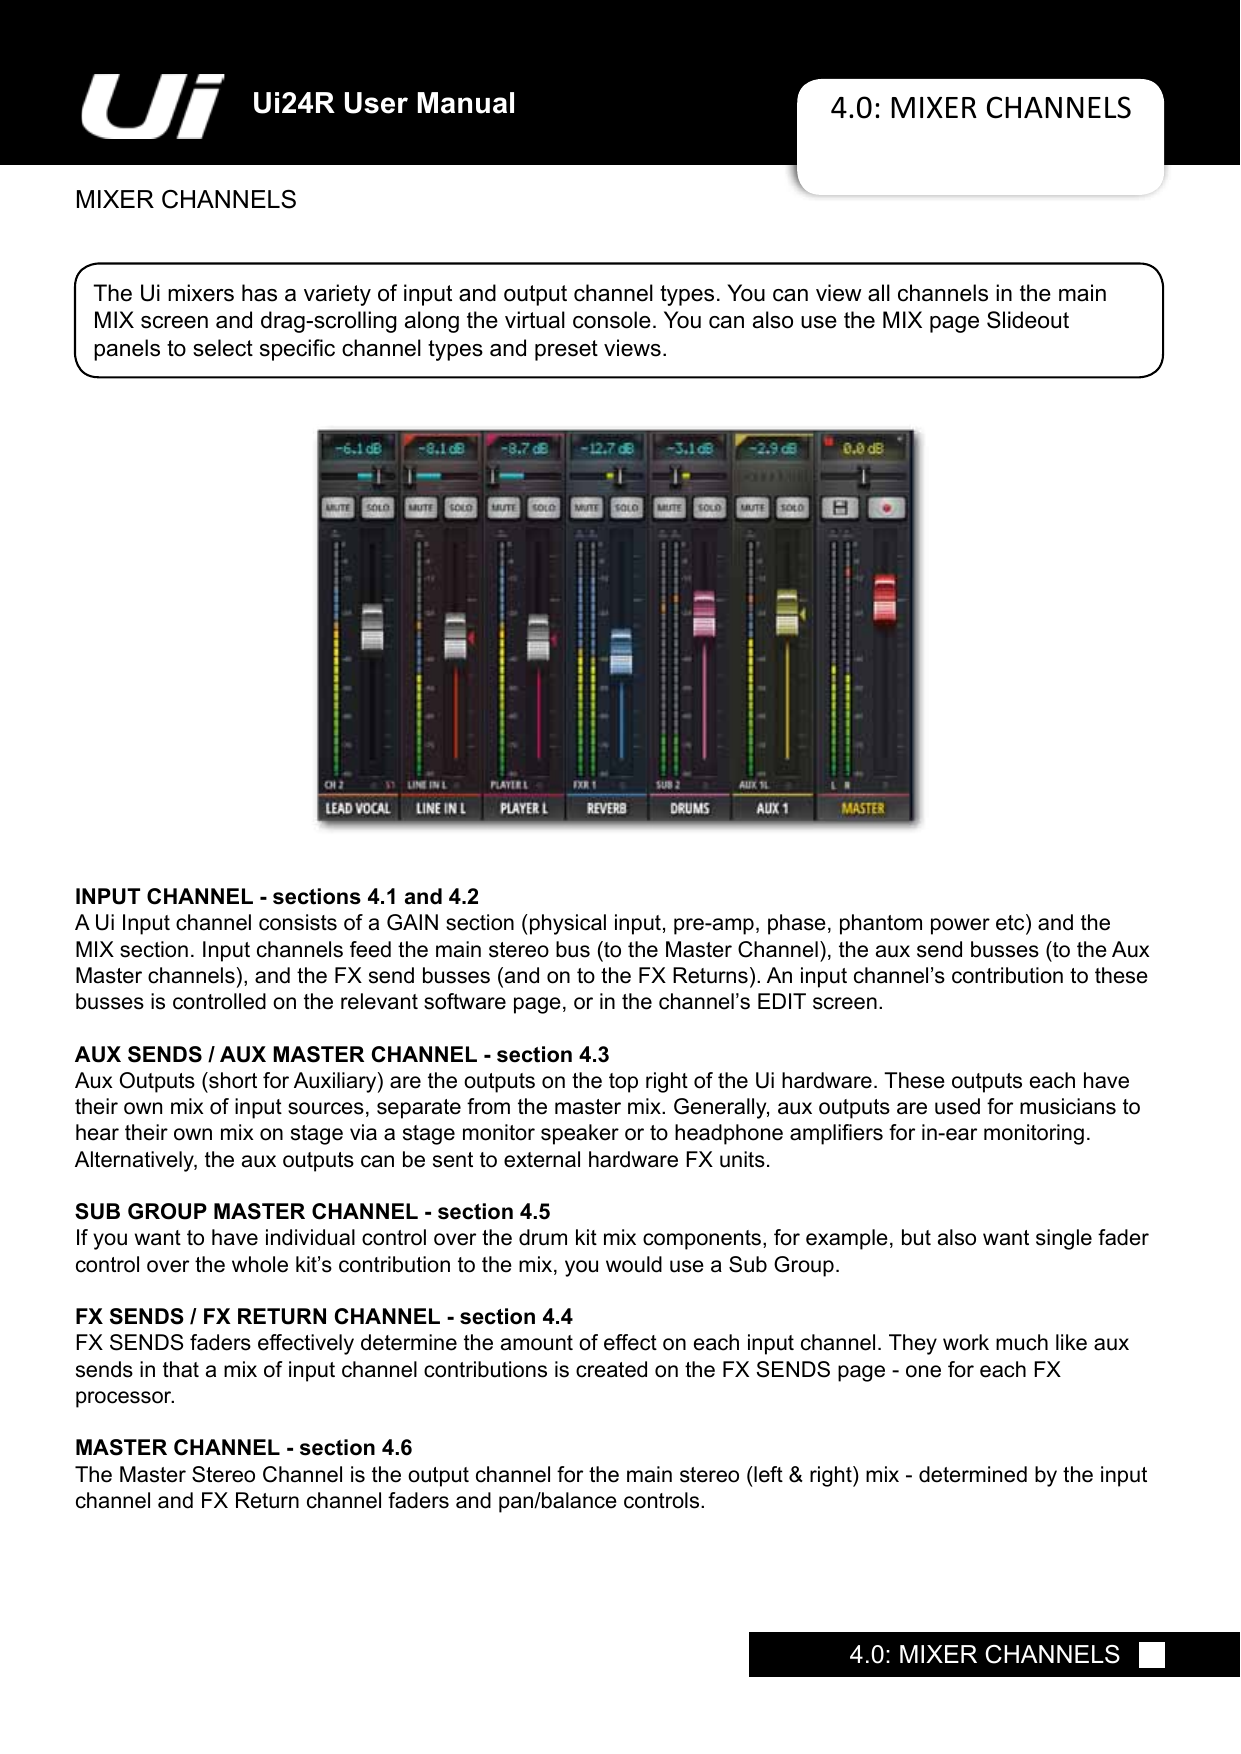 Ui24R User Manual 4.0: MIXER CHANNELSMIXER CHANNELS4.0: MIXER CHANNELSThe Ui mixers has a variety of input and output channel types. You can view all channels in the main MIX screen and drag-scrolling along the virtual console. You can also use the MIX page Slideout  panelstoselectspecicchanneltypesandpresetviews.INPUT CHANNEL - sections 4.1 and 4.2AUiInputchannelconsistsofaGAINsection(physicalinput,pre-amp,phase,phantompoweretc)andtheMIXsection.Inputchannelsfeedthemainstereobus(totheMasterChannel),theauxsendbusses(totheAuxMasterchannels),andtheFXsendbusses(andontotheFXReturns).Aninputchannel’scontributiontothesebussesiscontrolledontherelevantsoftwarepage,orinthechannel’sEDITscreen.AUX SENDS / AUX MASTER CHANNEL - section 4.3AuxOutputs(shortforAuxiliary)aretheoutputsonthetoprightoftheUihardware.Theseoutputseachhavetheir own mix of input sources, separate from the master mix. Generally, aux outputs are used for musicians to heartheirownmixonstageviaastagemonitorspeakerortoheadphoneampliersforin-earmonitoring. Alternatively, the aux outputs can be sent to external hardware FX units.SUB GROUP MASTER CHANNEL - section 4.5If you want to have individual control over the drum kit mix components, for example, but also want single fader controloverthewholekit’scontributiontothemix,youwoulduseaSubGroup.FX SENDS / FX RETURN CHANNEL - section 4.4FX SENDS faders effectively determine the amount of effect on each input channel. They work much like aux sends in that a mix of input channel contributions is created on the FX SENDS page - one for each FX  processor. MASTER CHANNEL - section 4.6TheMasterStereoChannelistheoutputchannelforthemainstereo(left&amp;right)mix-determinedbytheinputchannel and FX Return channel faders and pan/balance controls.